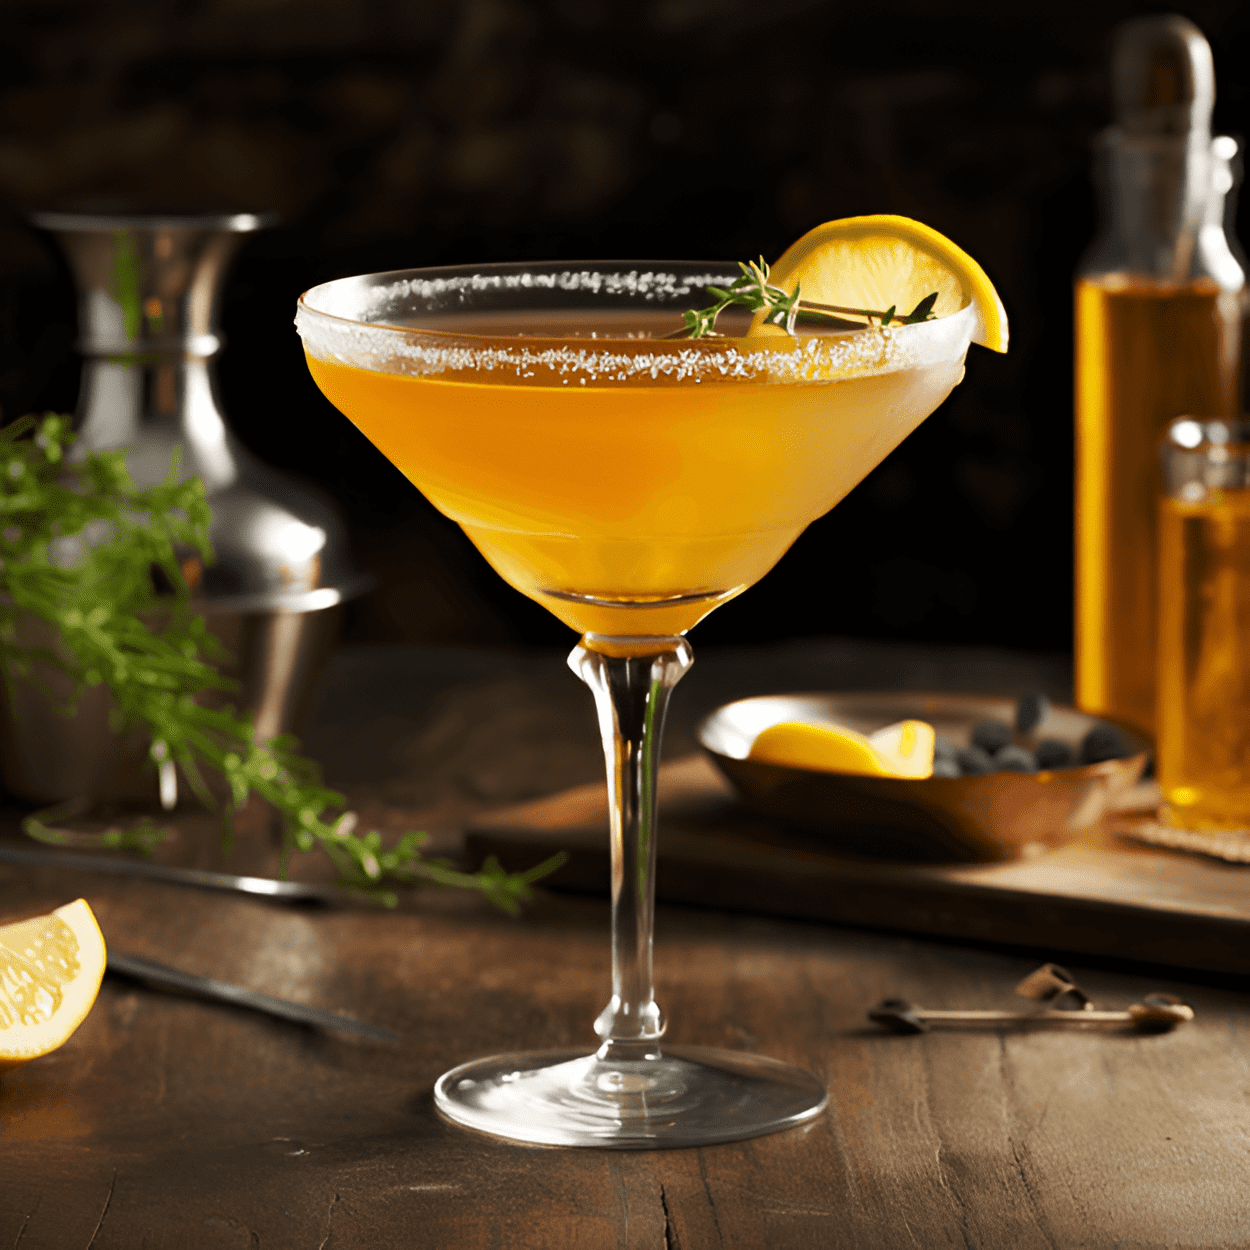 Fernando Cocktail Recipe - The Fernando cocktail has a robust, strong taste with a hint of sweetness. The combination of the whiskey and vermouth gives it a rich, full-bodied flavor, while the cherry liqueur adds a touch of sweetness.